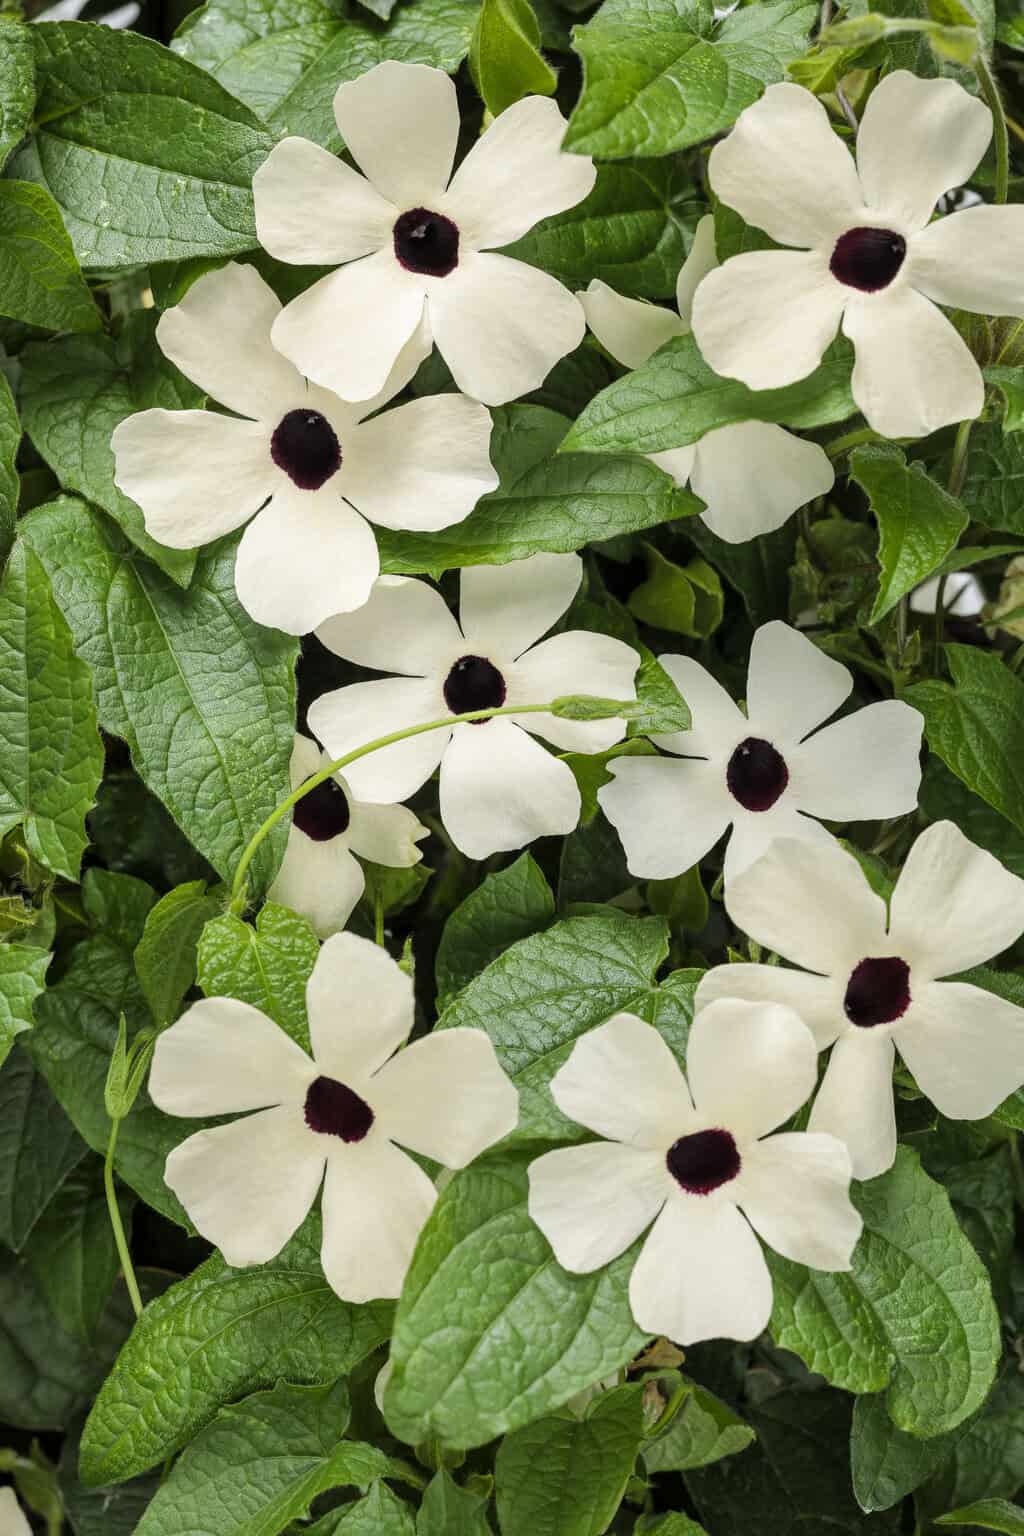 A cluster of white impatiens with dark centers surrounded by lush green foliage. In a charming garden style, the blooms feature five petals each, creating a striking contrast against the deep, textured leaves. The flowers are evenly spread throughout the plant, adding to the overall beauty of the scene.